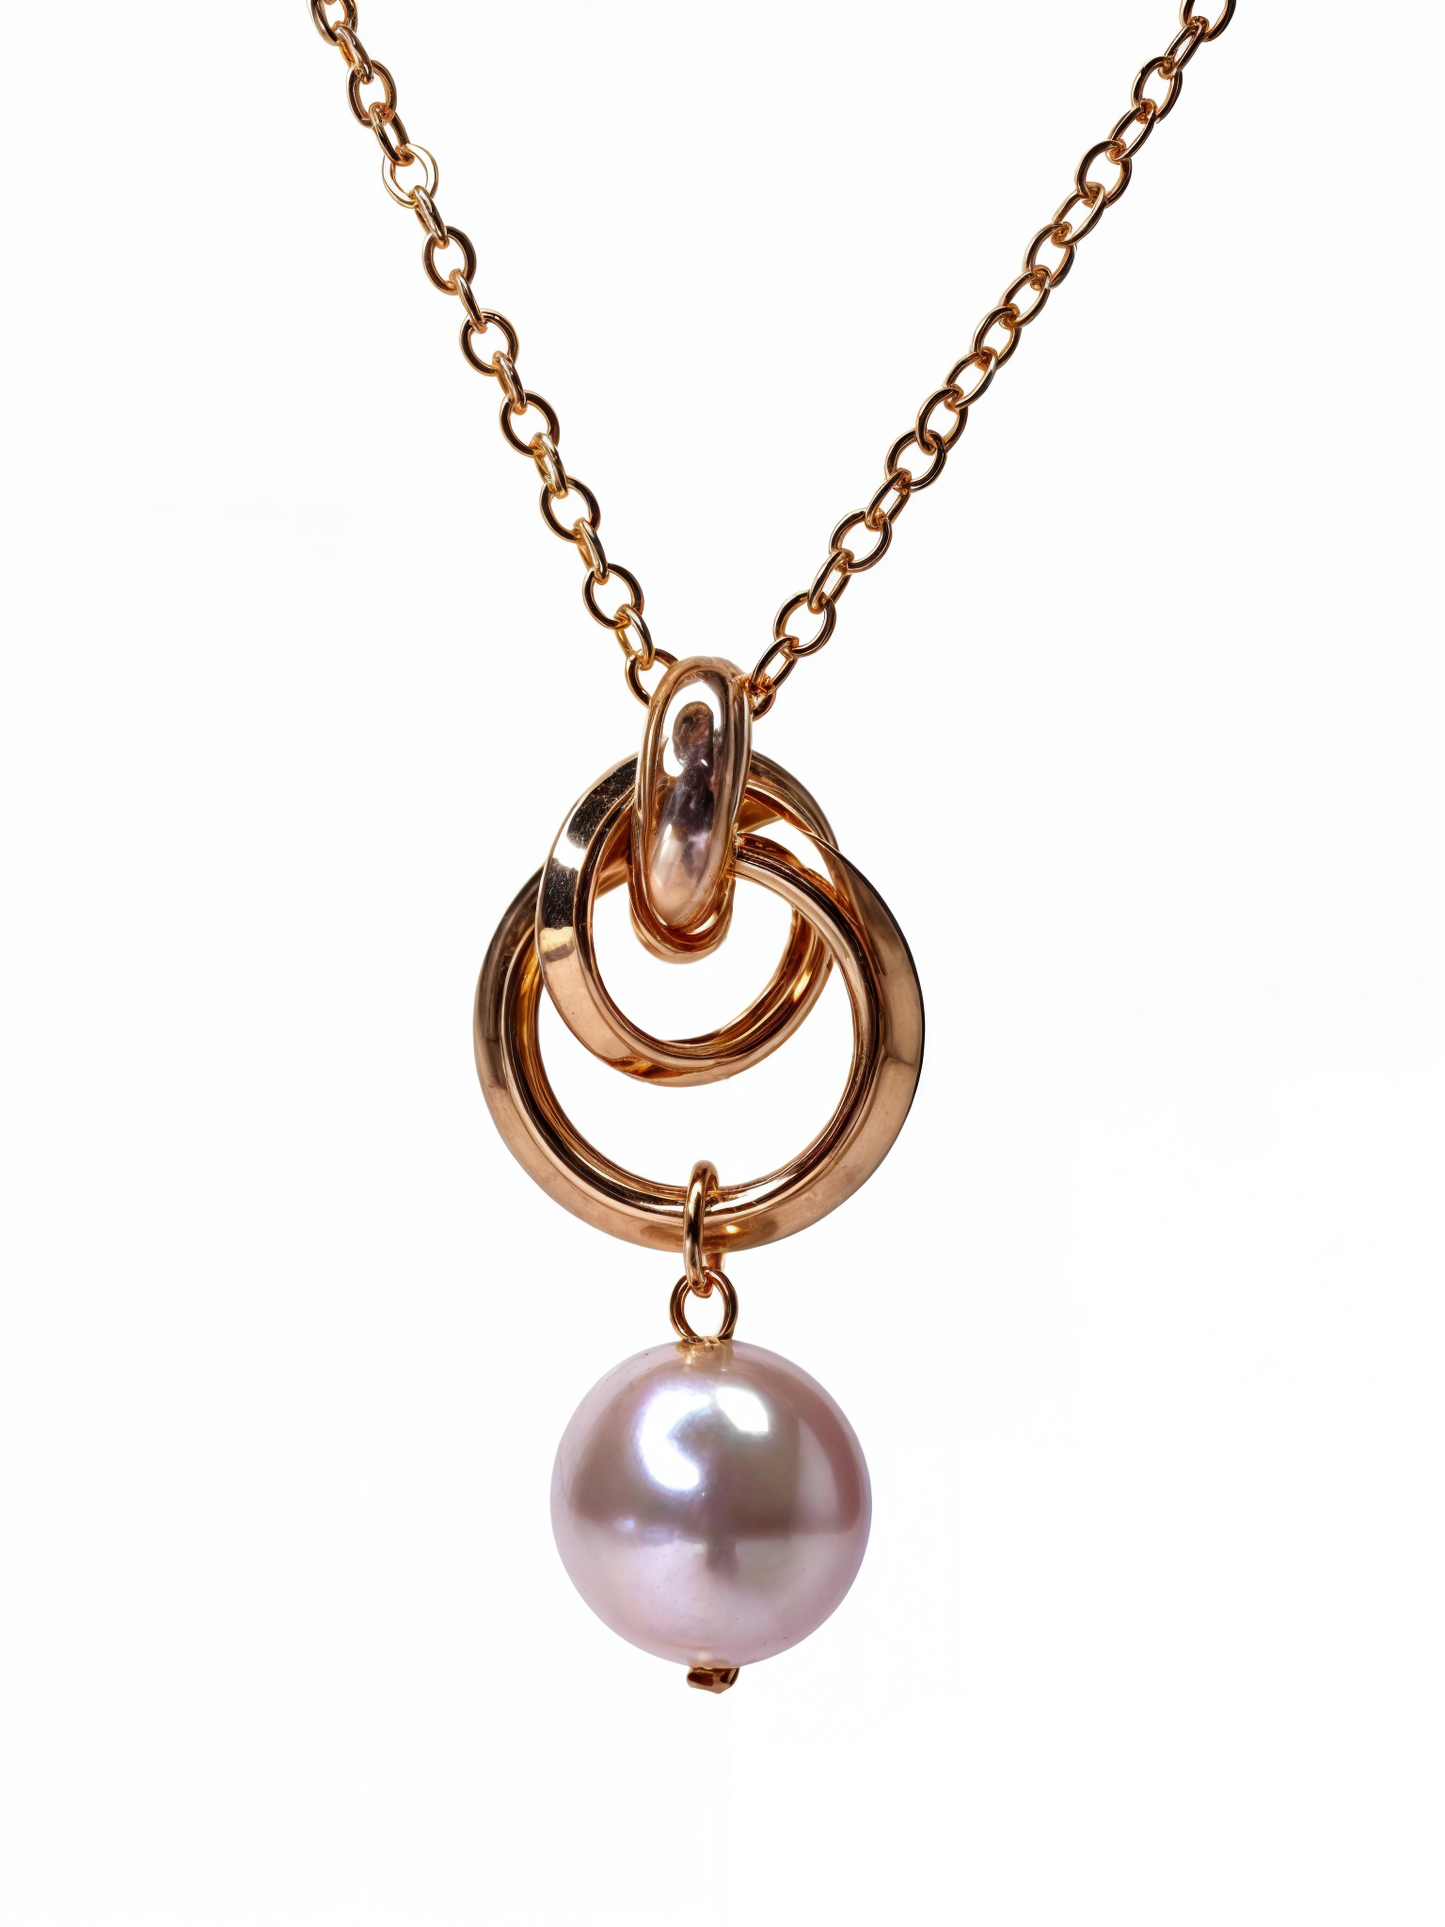 Golden Plated Long Chain Pendant with Hanging Pearl